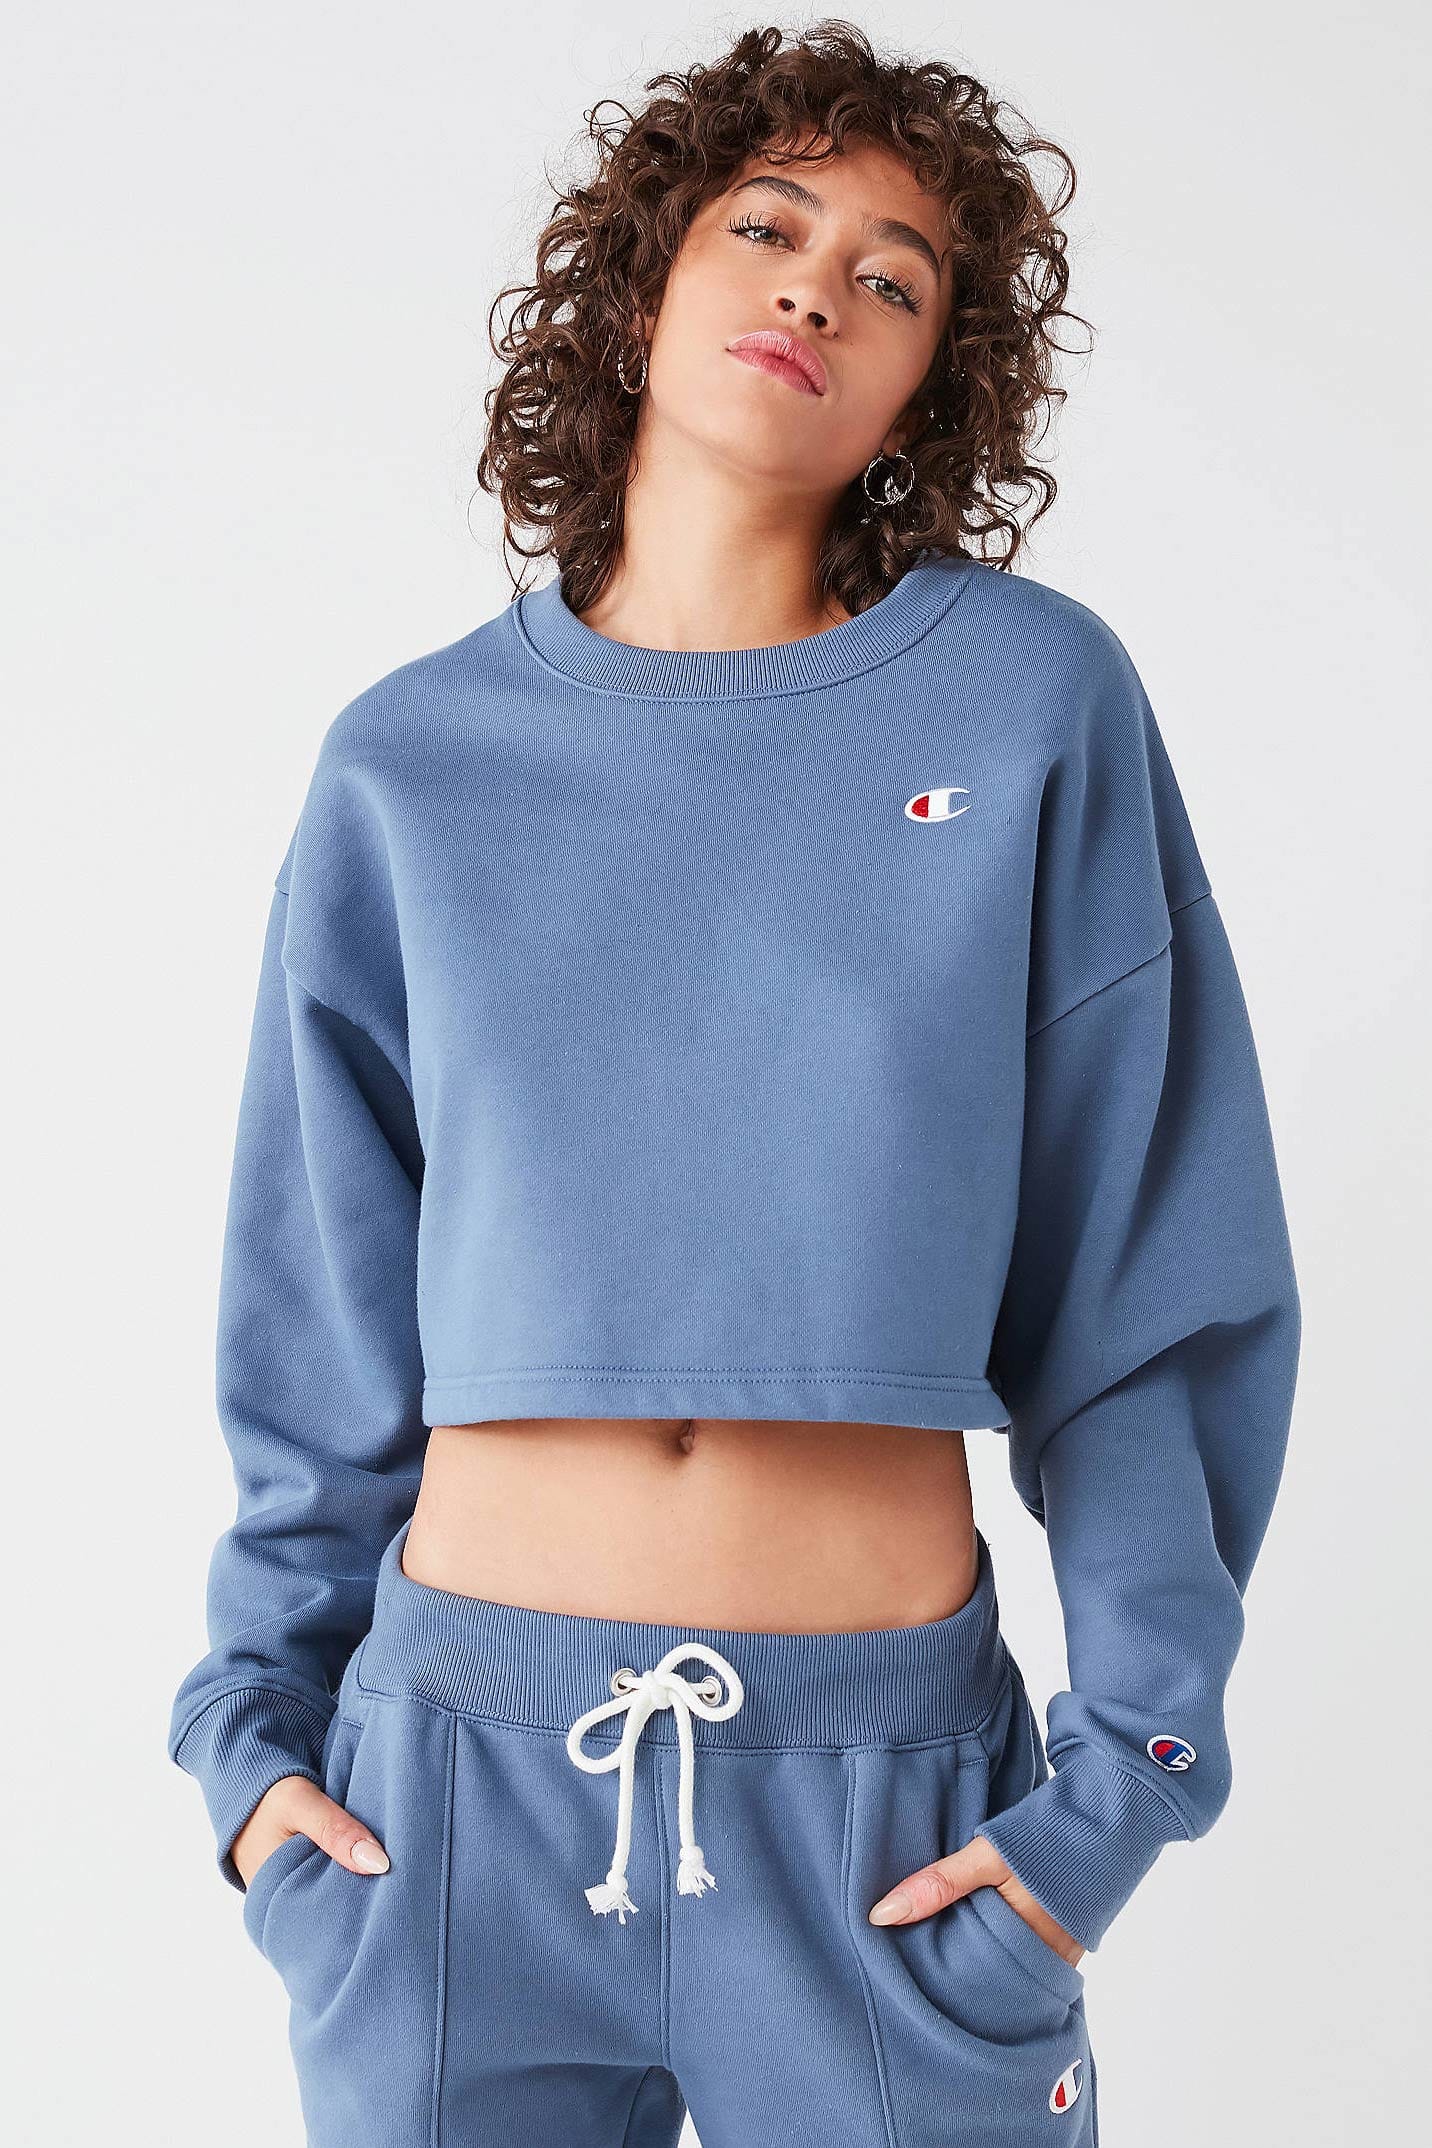 Champion x Urban Outfitters' Blue 